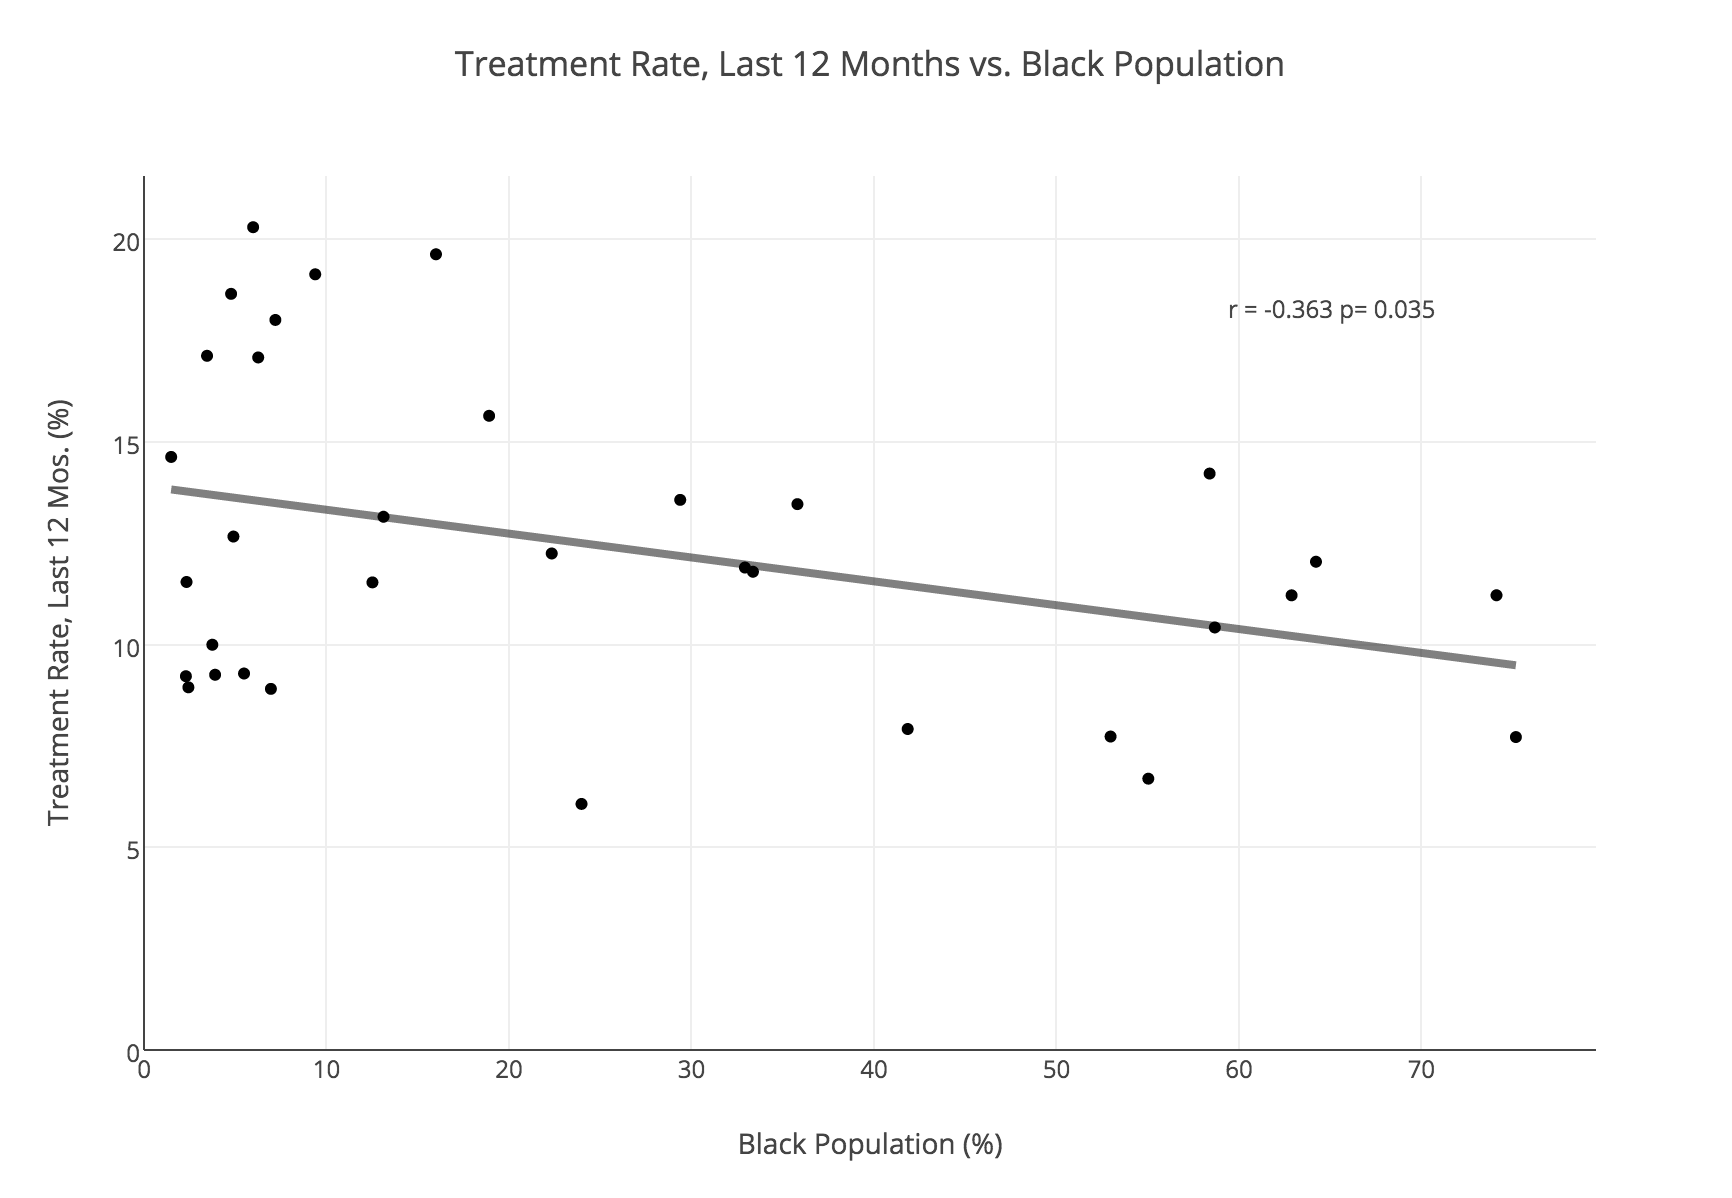 Black People In New York Suffer From Depression More Than Any Other Group In The City